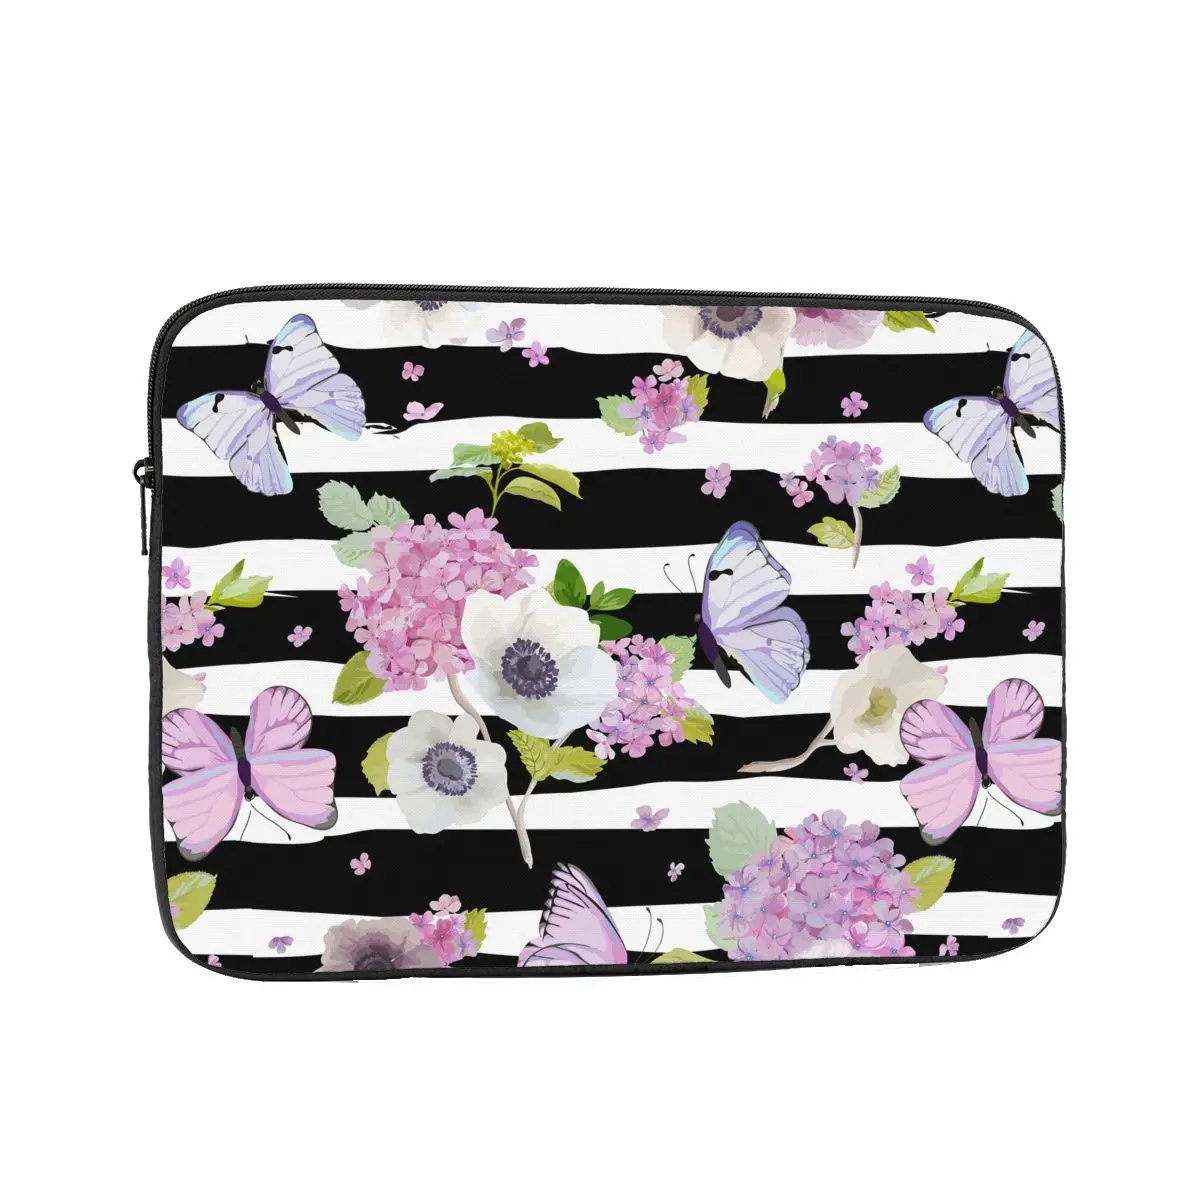 

Floral Laptop Bag Liner Sleeve for Macbook Air 13 Pro 14 15in 17in Notebook Pouch Bag 10 12in Tablet Case iPad Protective Bag